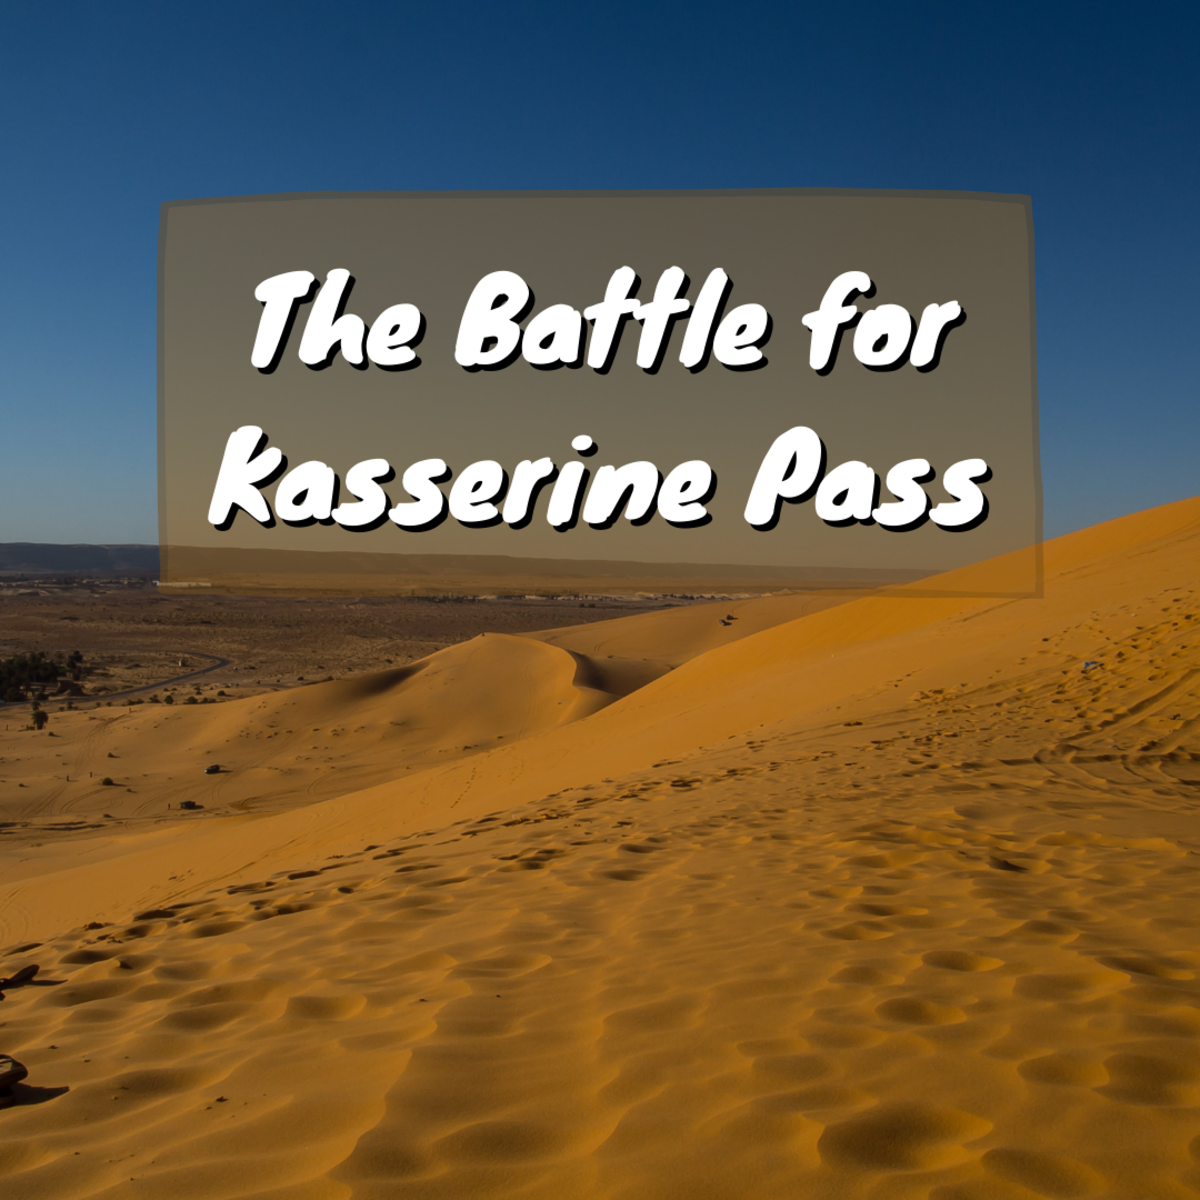 This article discusses German general Erwin Rommel's struggle to control North Africa in World War II, and the decisive Battle for Kasserine Pass fought in April of 1943. This would be the United States' first major battlefield defeat during WWII.